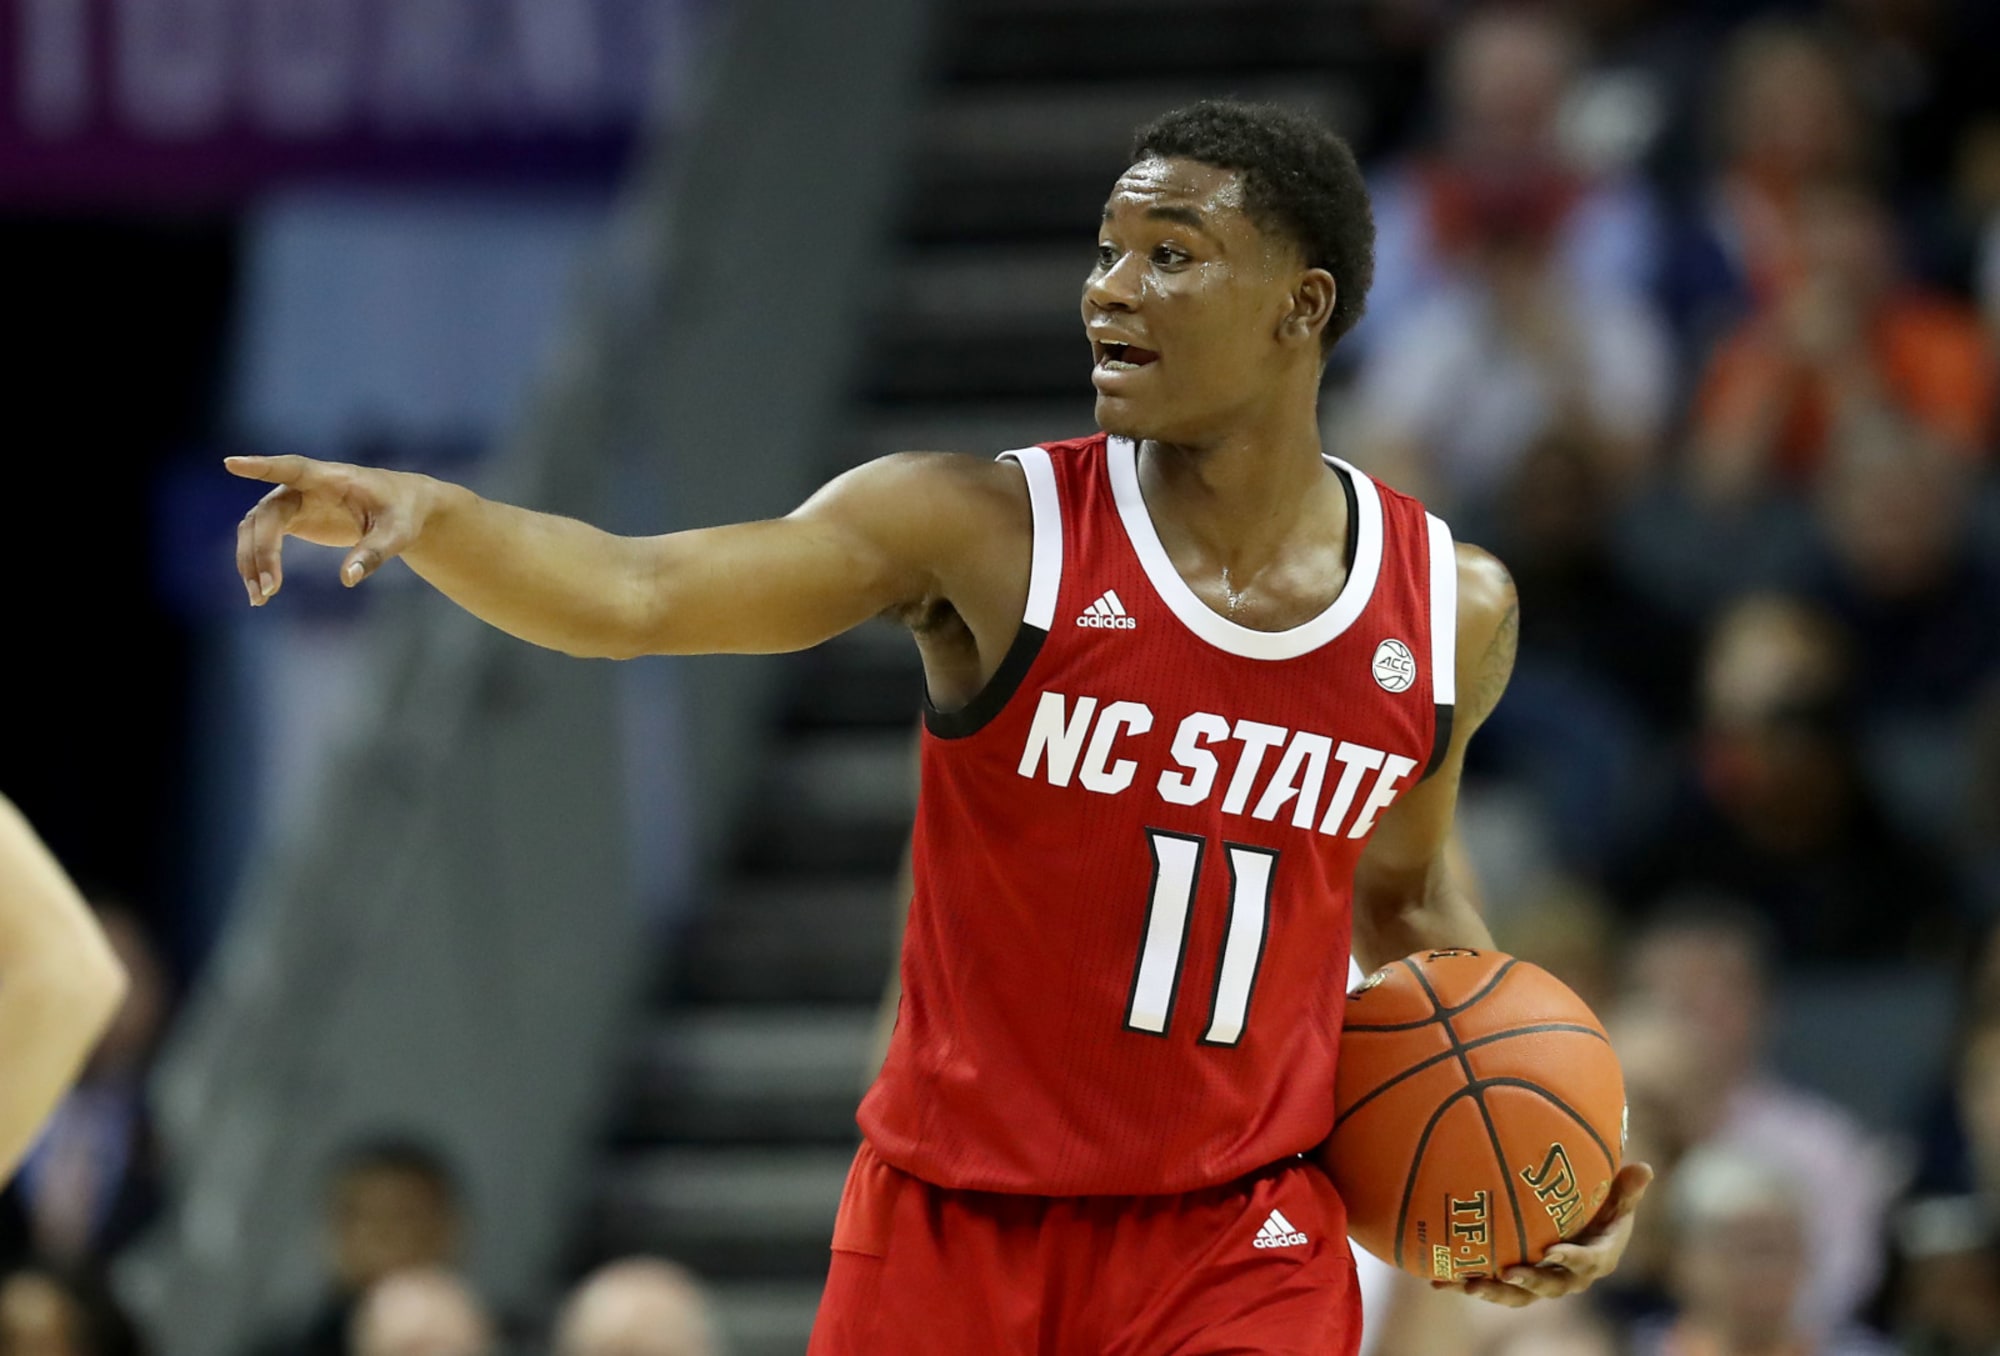 NC State Basketball: Breaking down the 2019 recruiting class